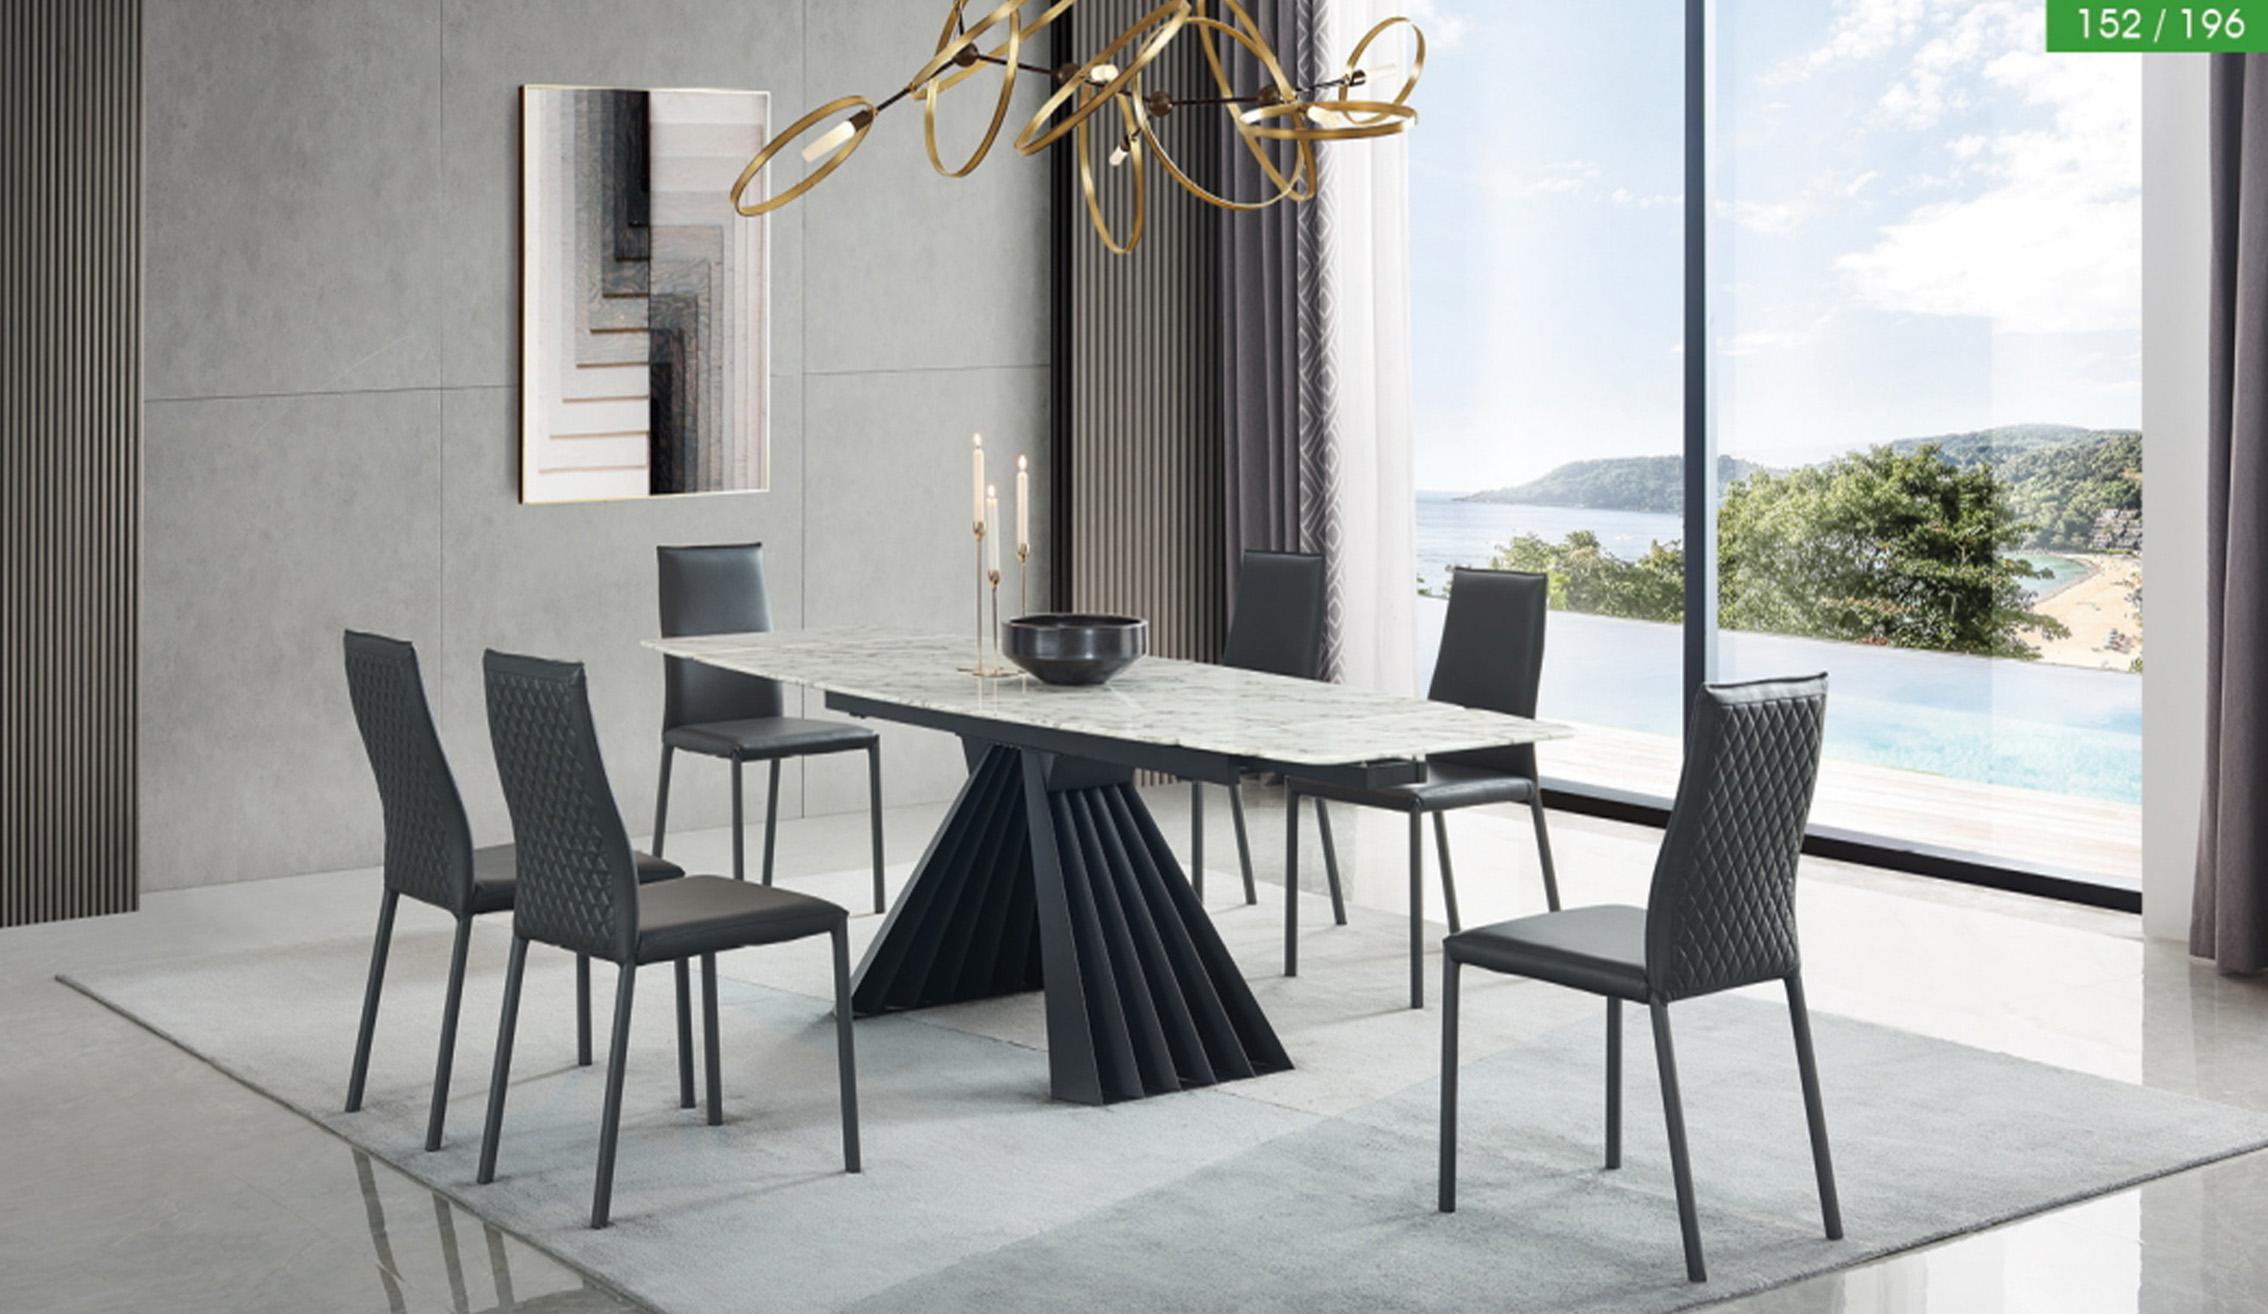 Contemporary Dining Table Set 152DININGTABLE 152DININGTABLE-7PC in Gray, Black 